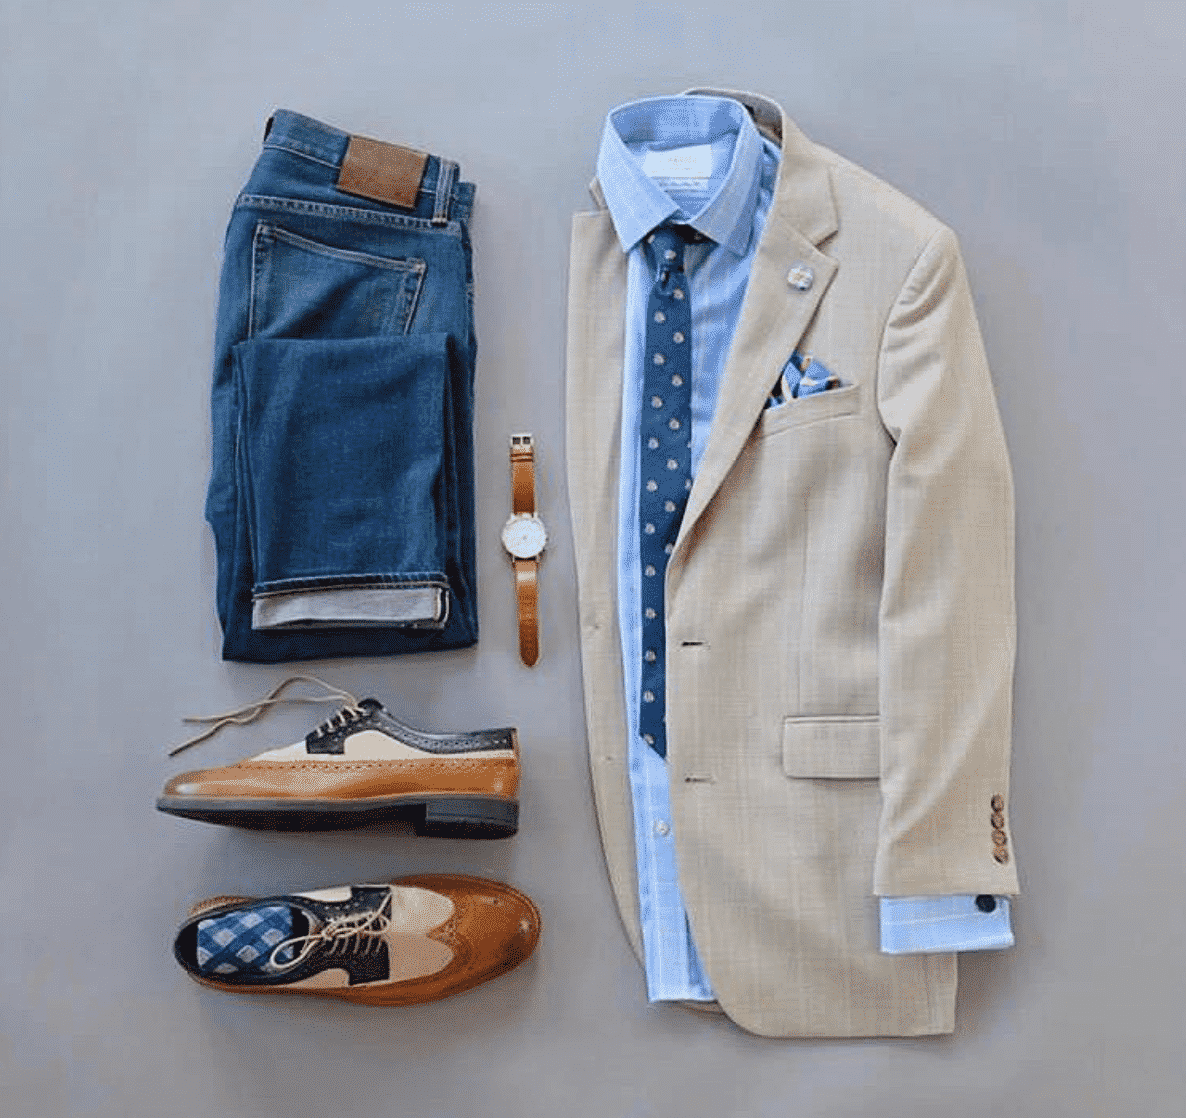 casual outfit ideas for men